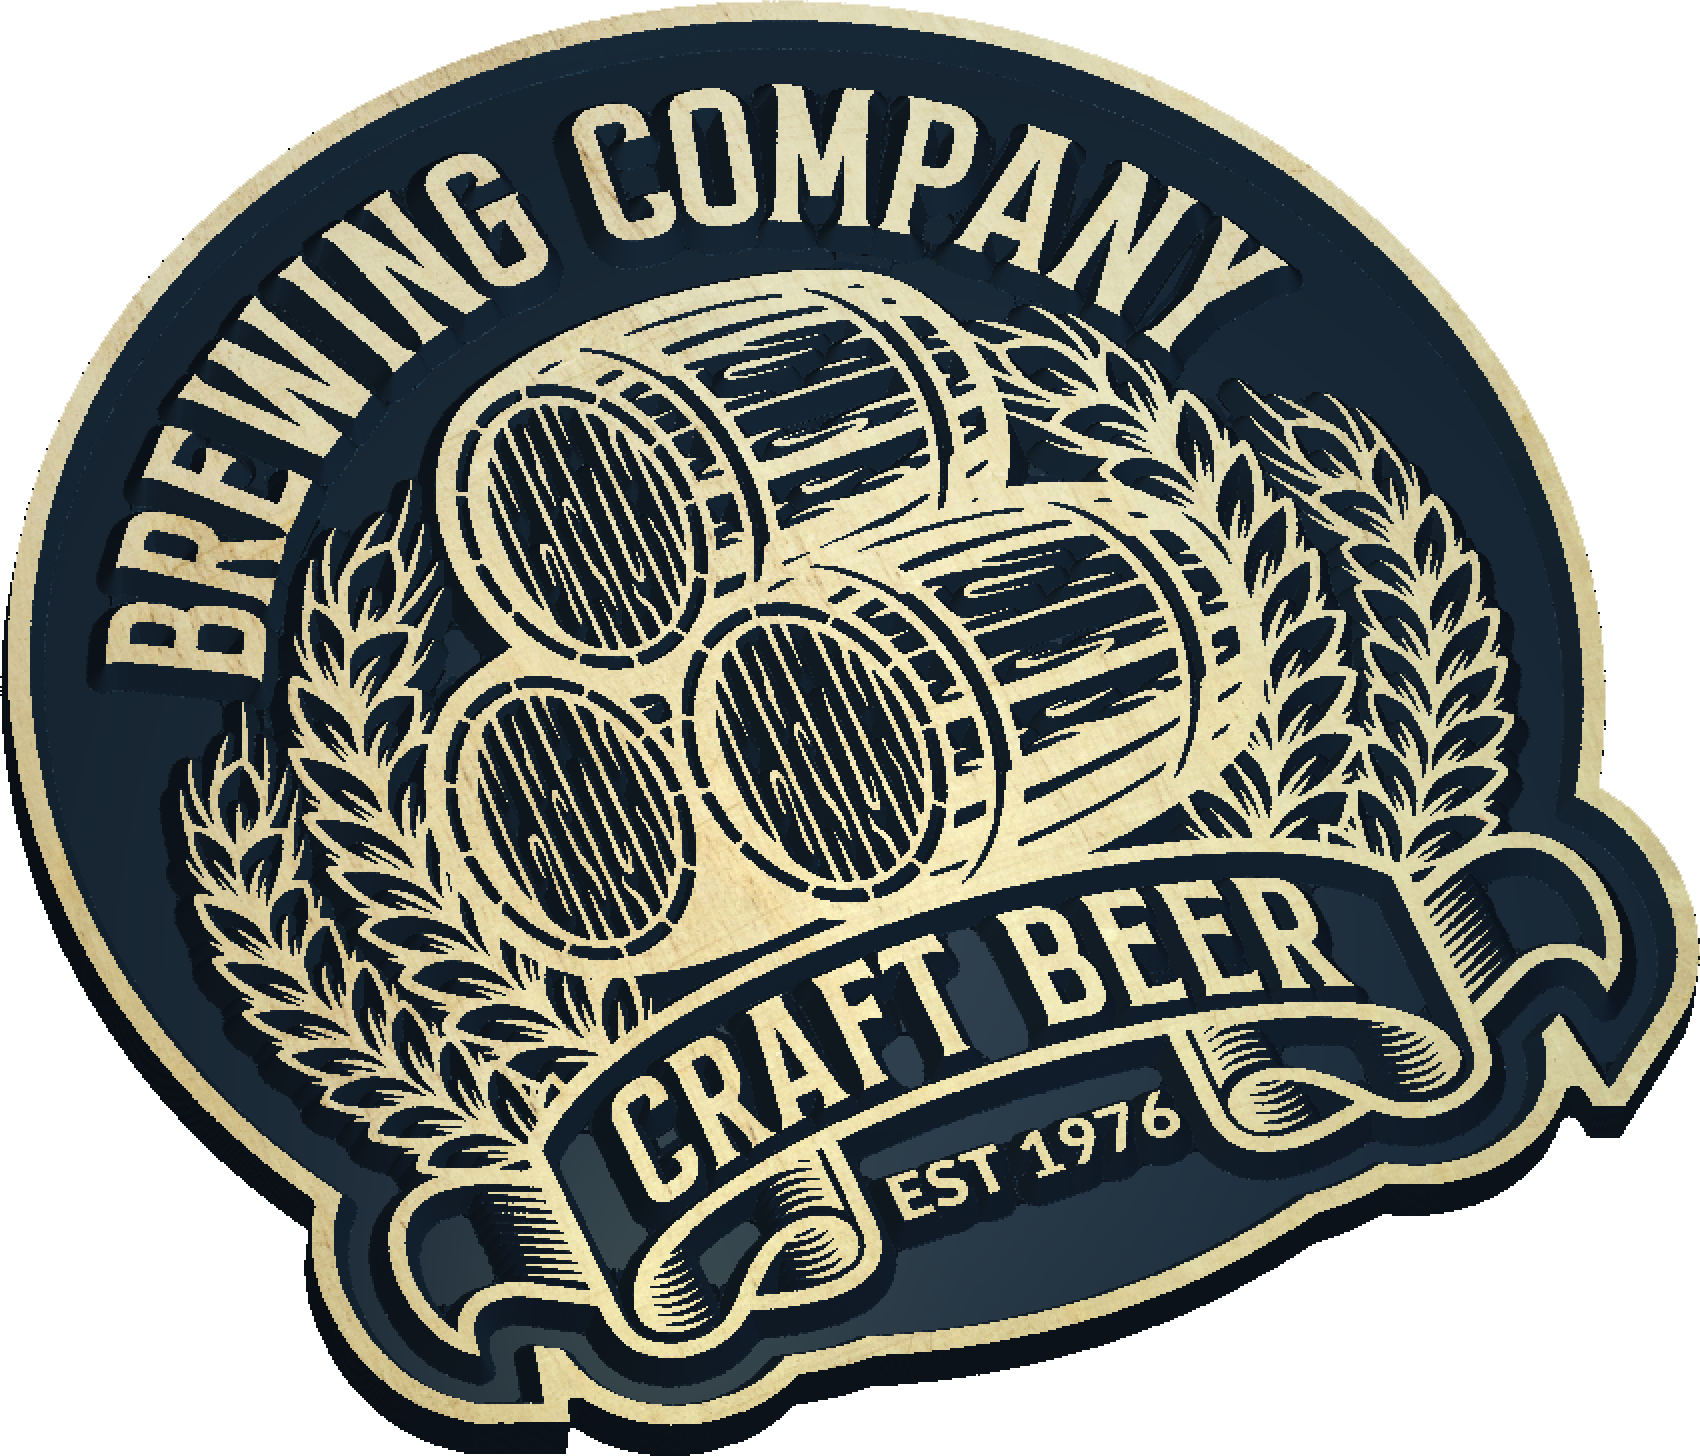 Craft Beer Brewing Company Sign